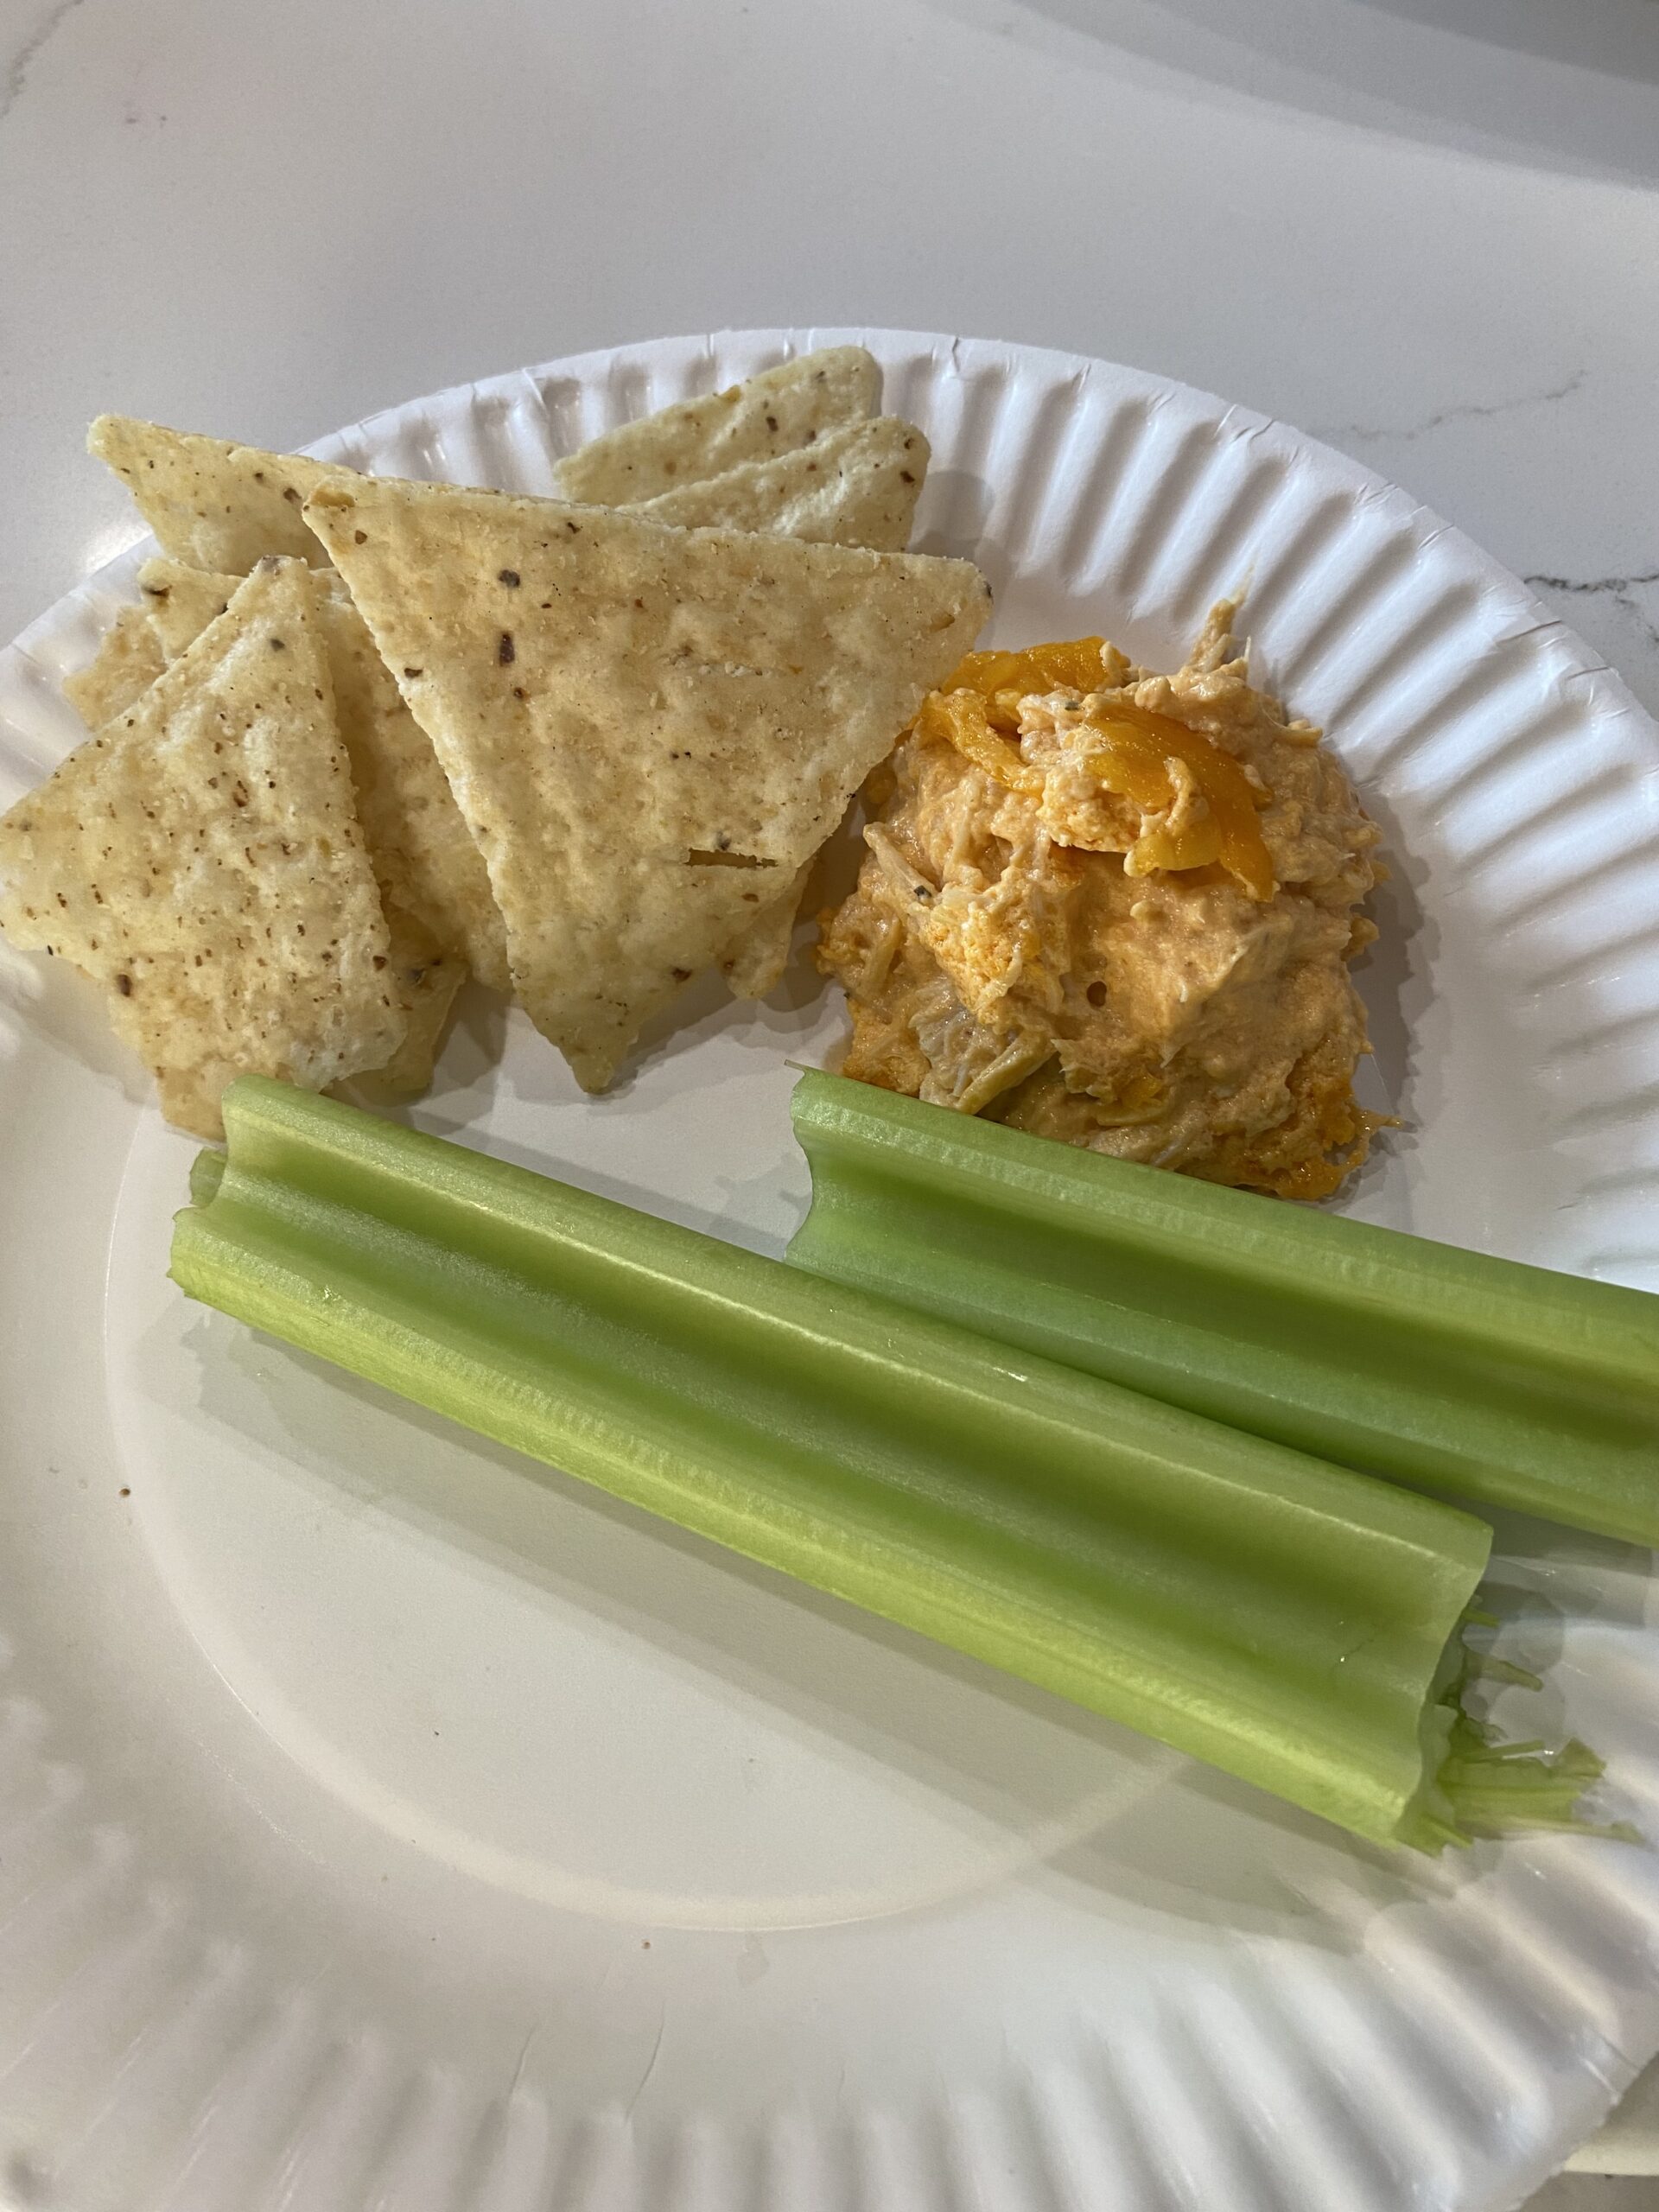 The buffalo chicken dip, being served with tortilla chips and some celery sticks.